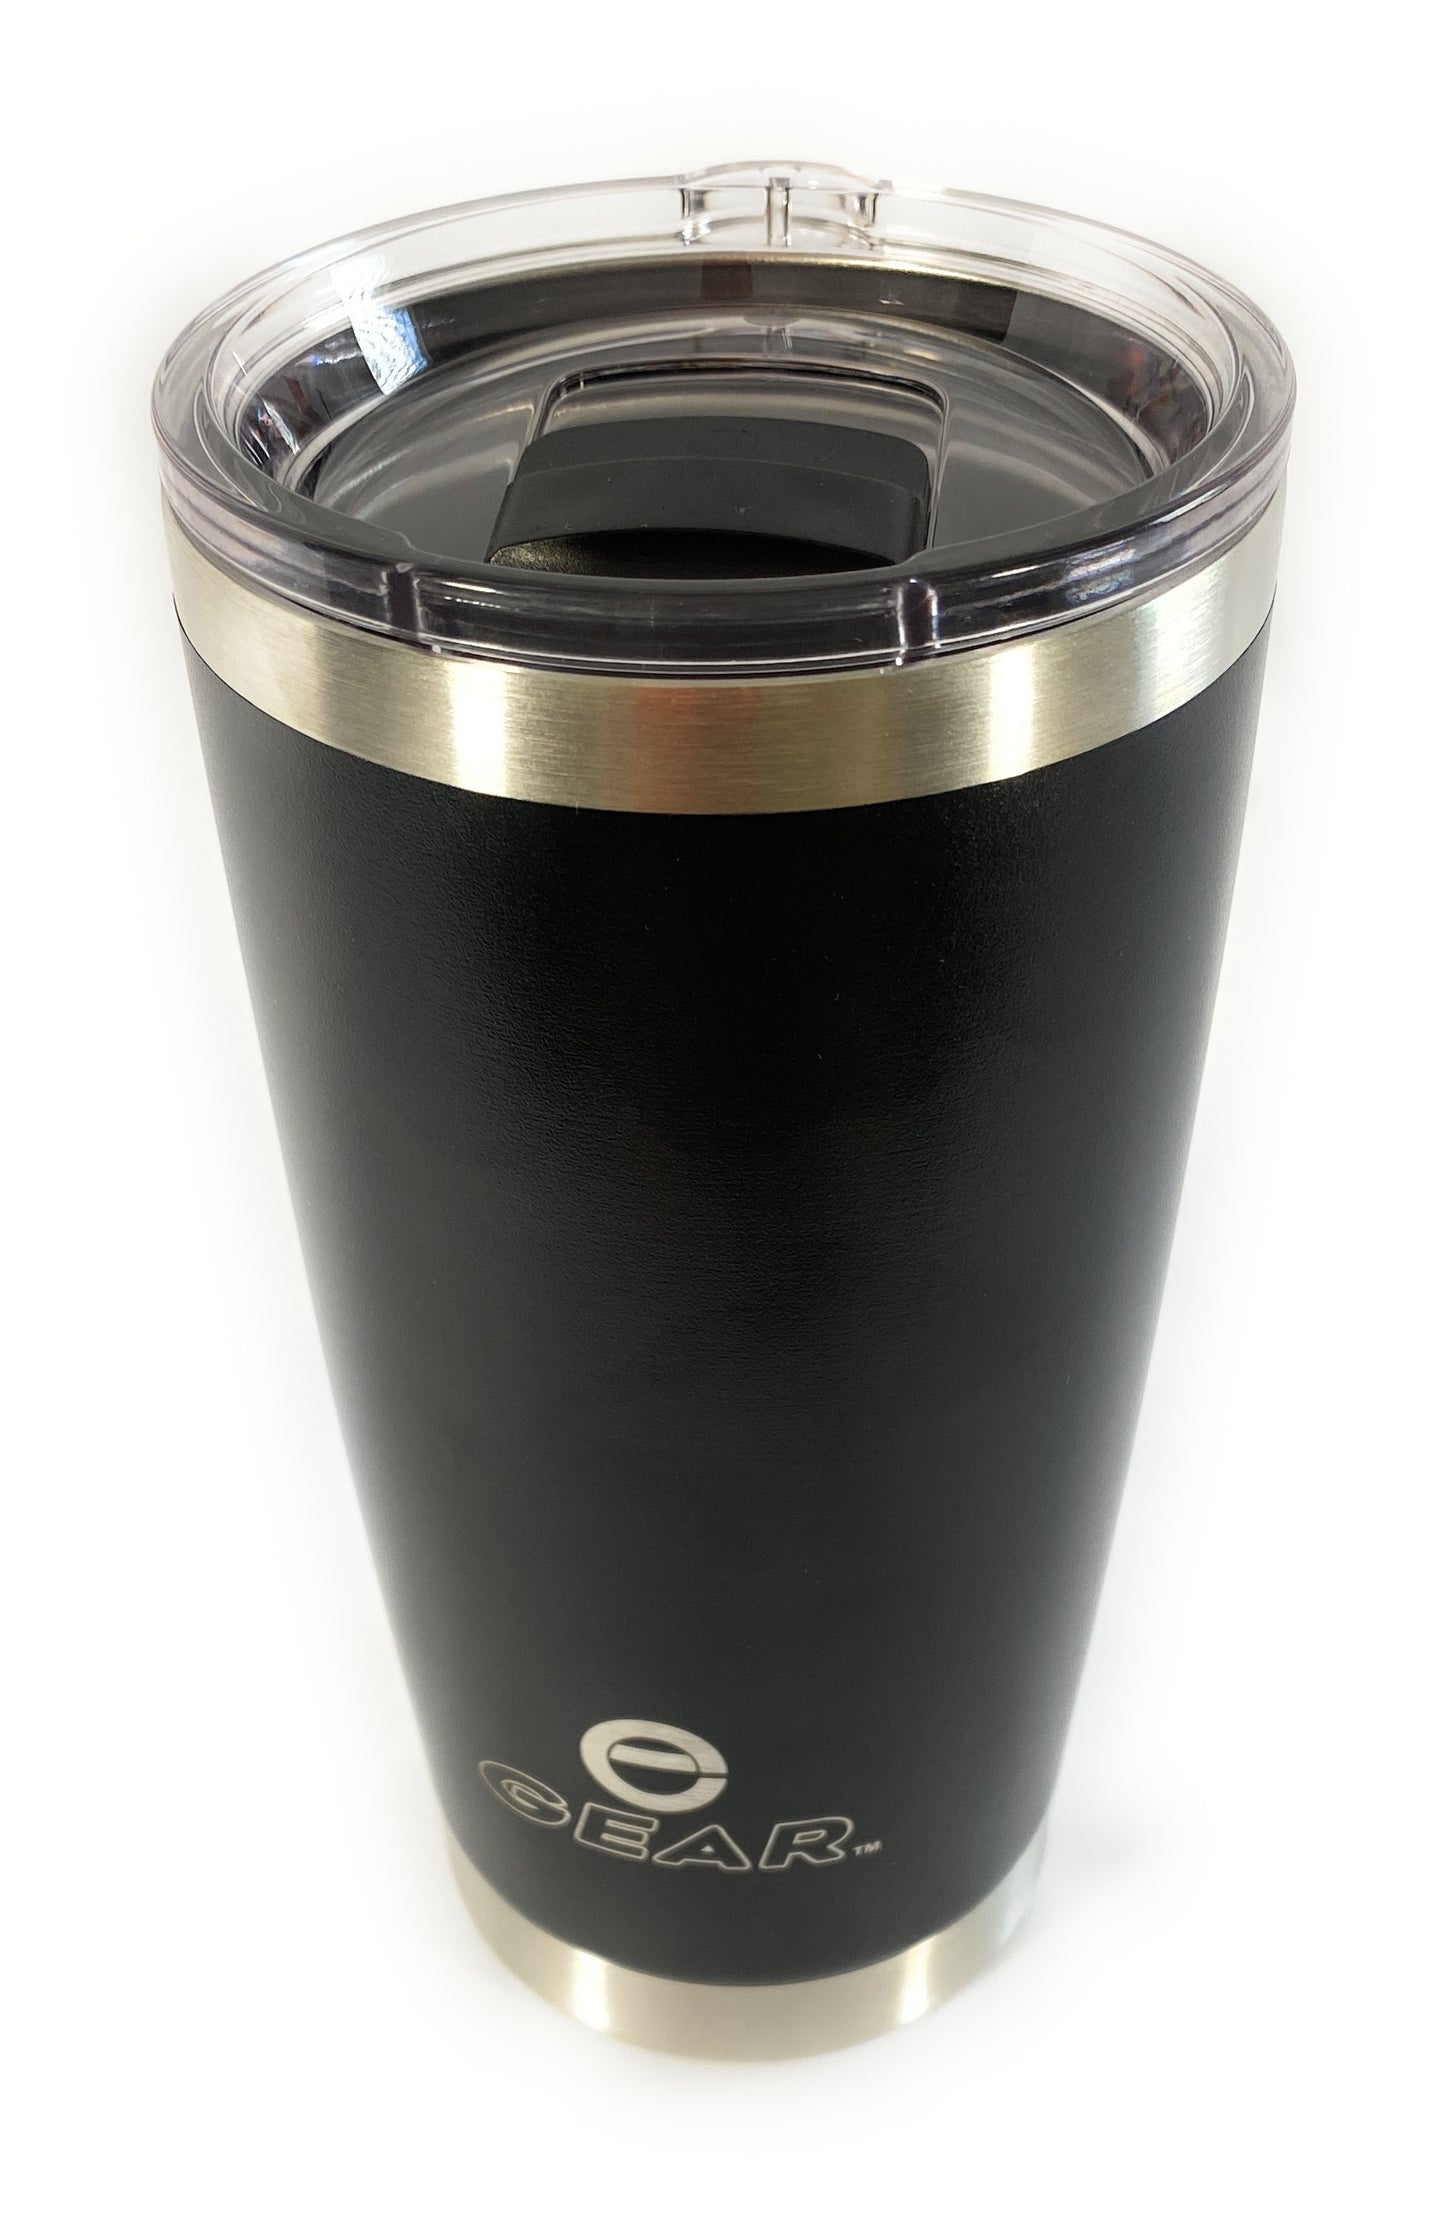 Enthusiast Gear 20 oz Tumbler with Magnetic Slider Lid, Stainless Steel, Vacuum Insulated for Hot and Cold Drinks